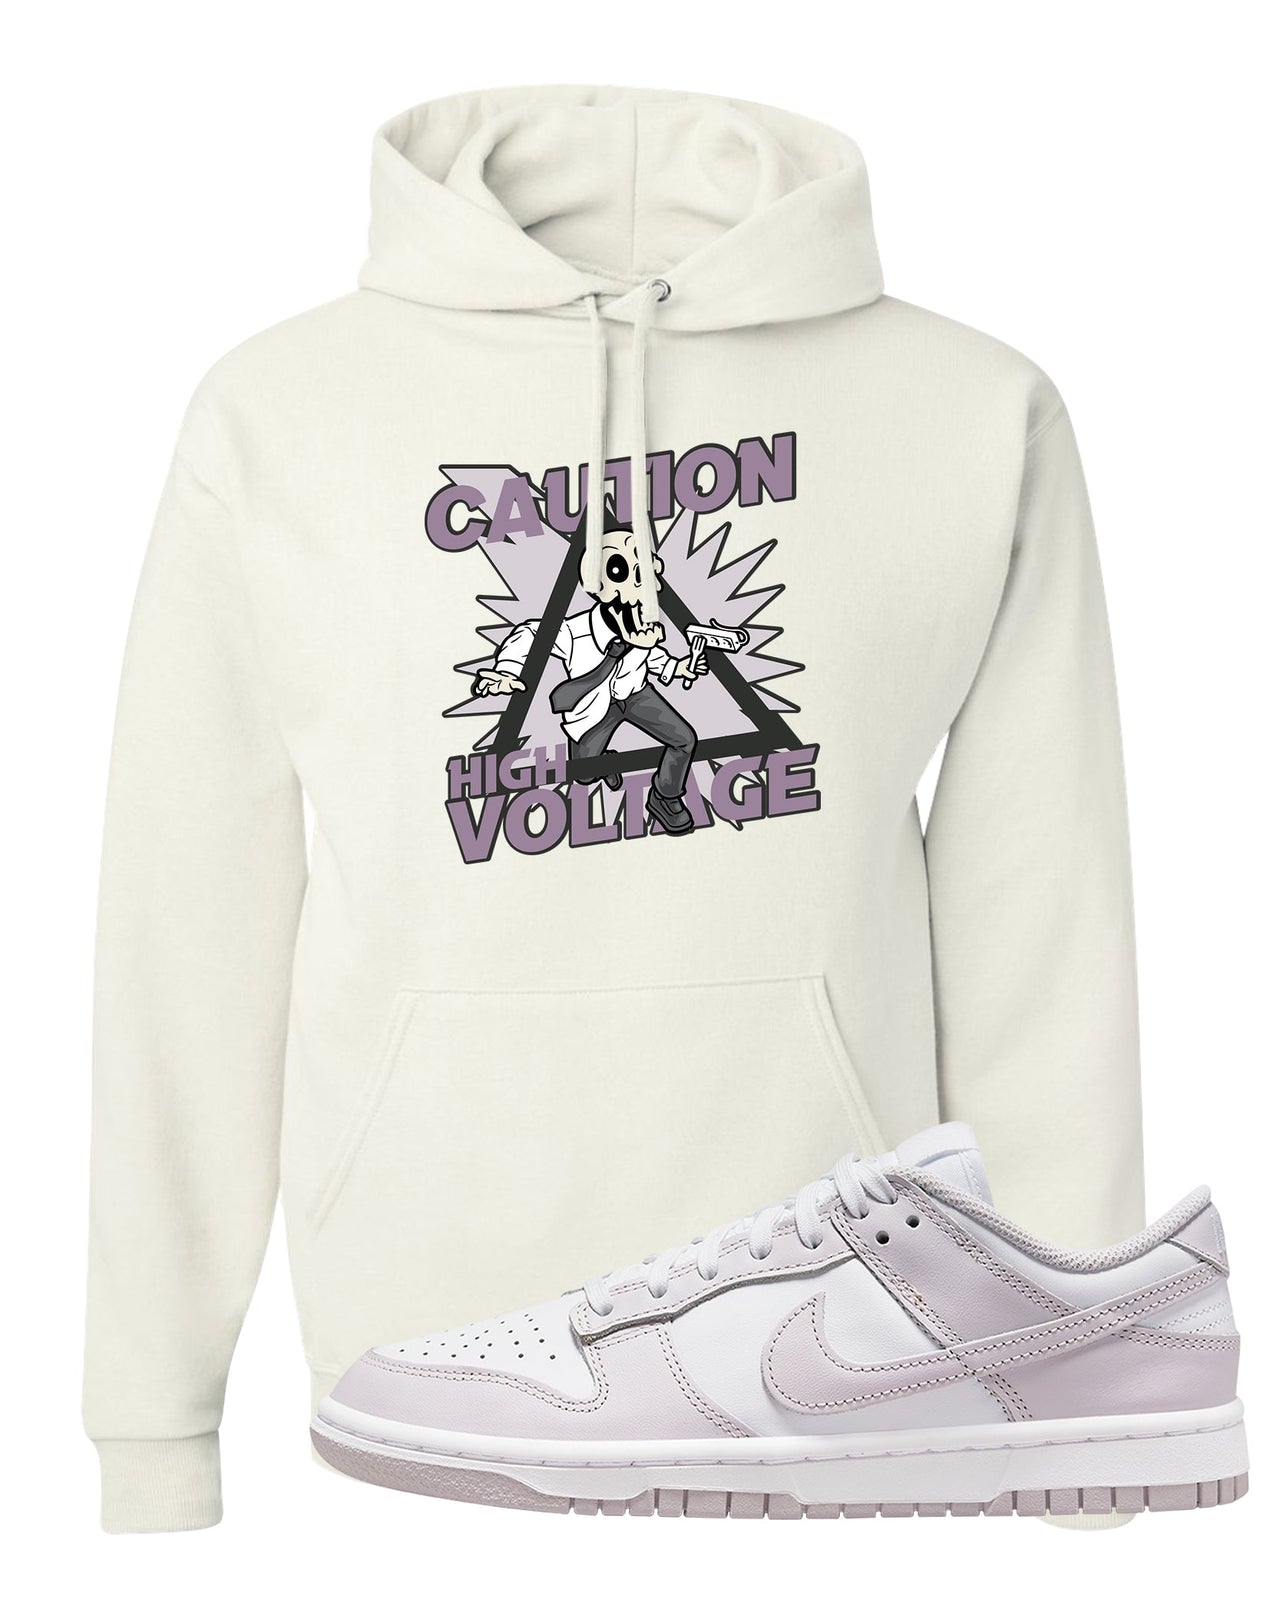 Venice Low Dunks Hoodie | Caution High Voltage, White